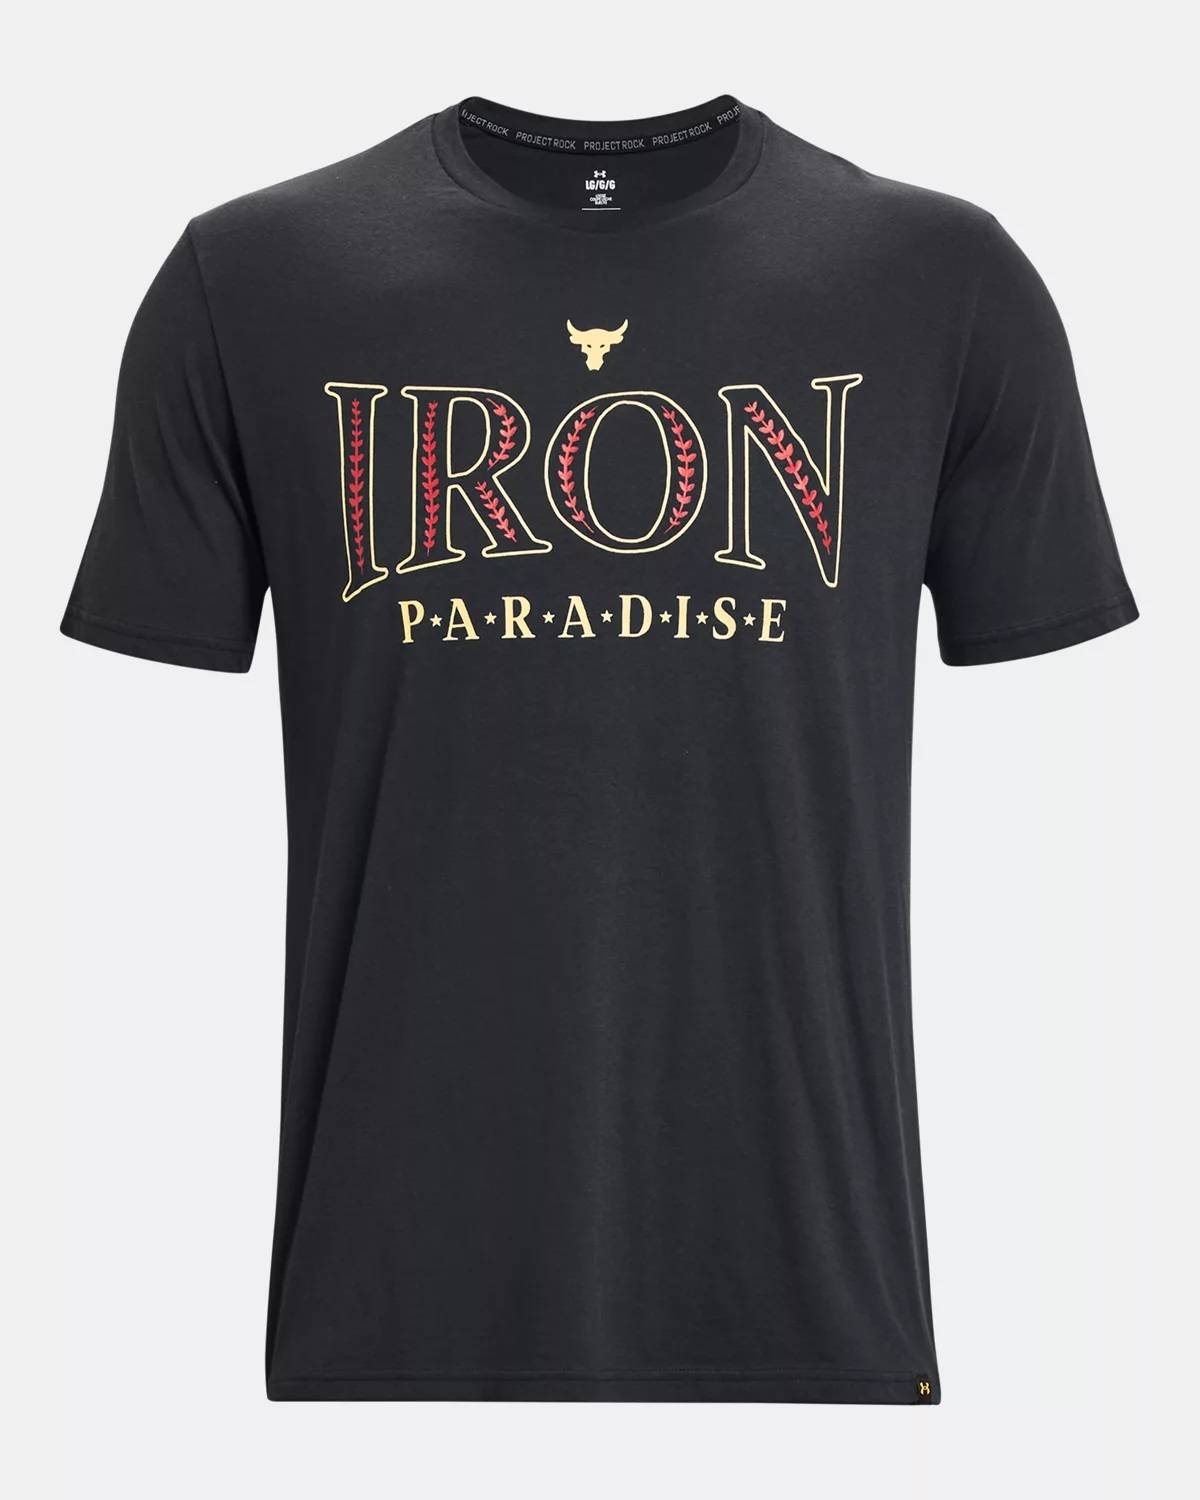 UNDER ARMOUR PROJECT ROCK PARADISE TEE